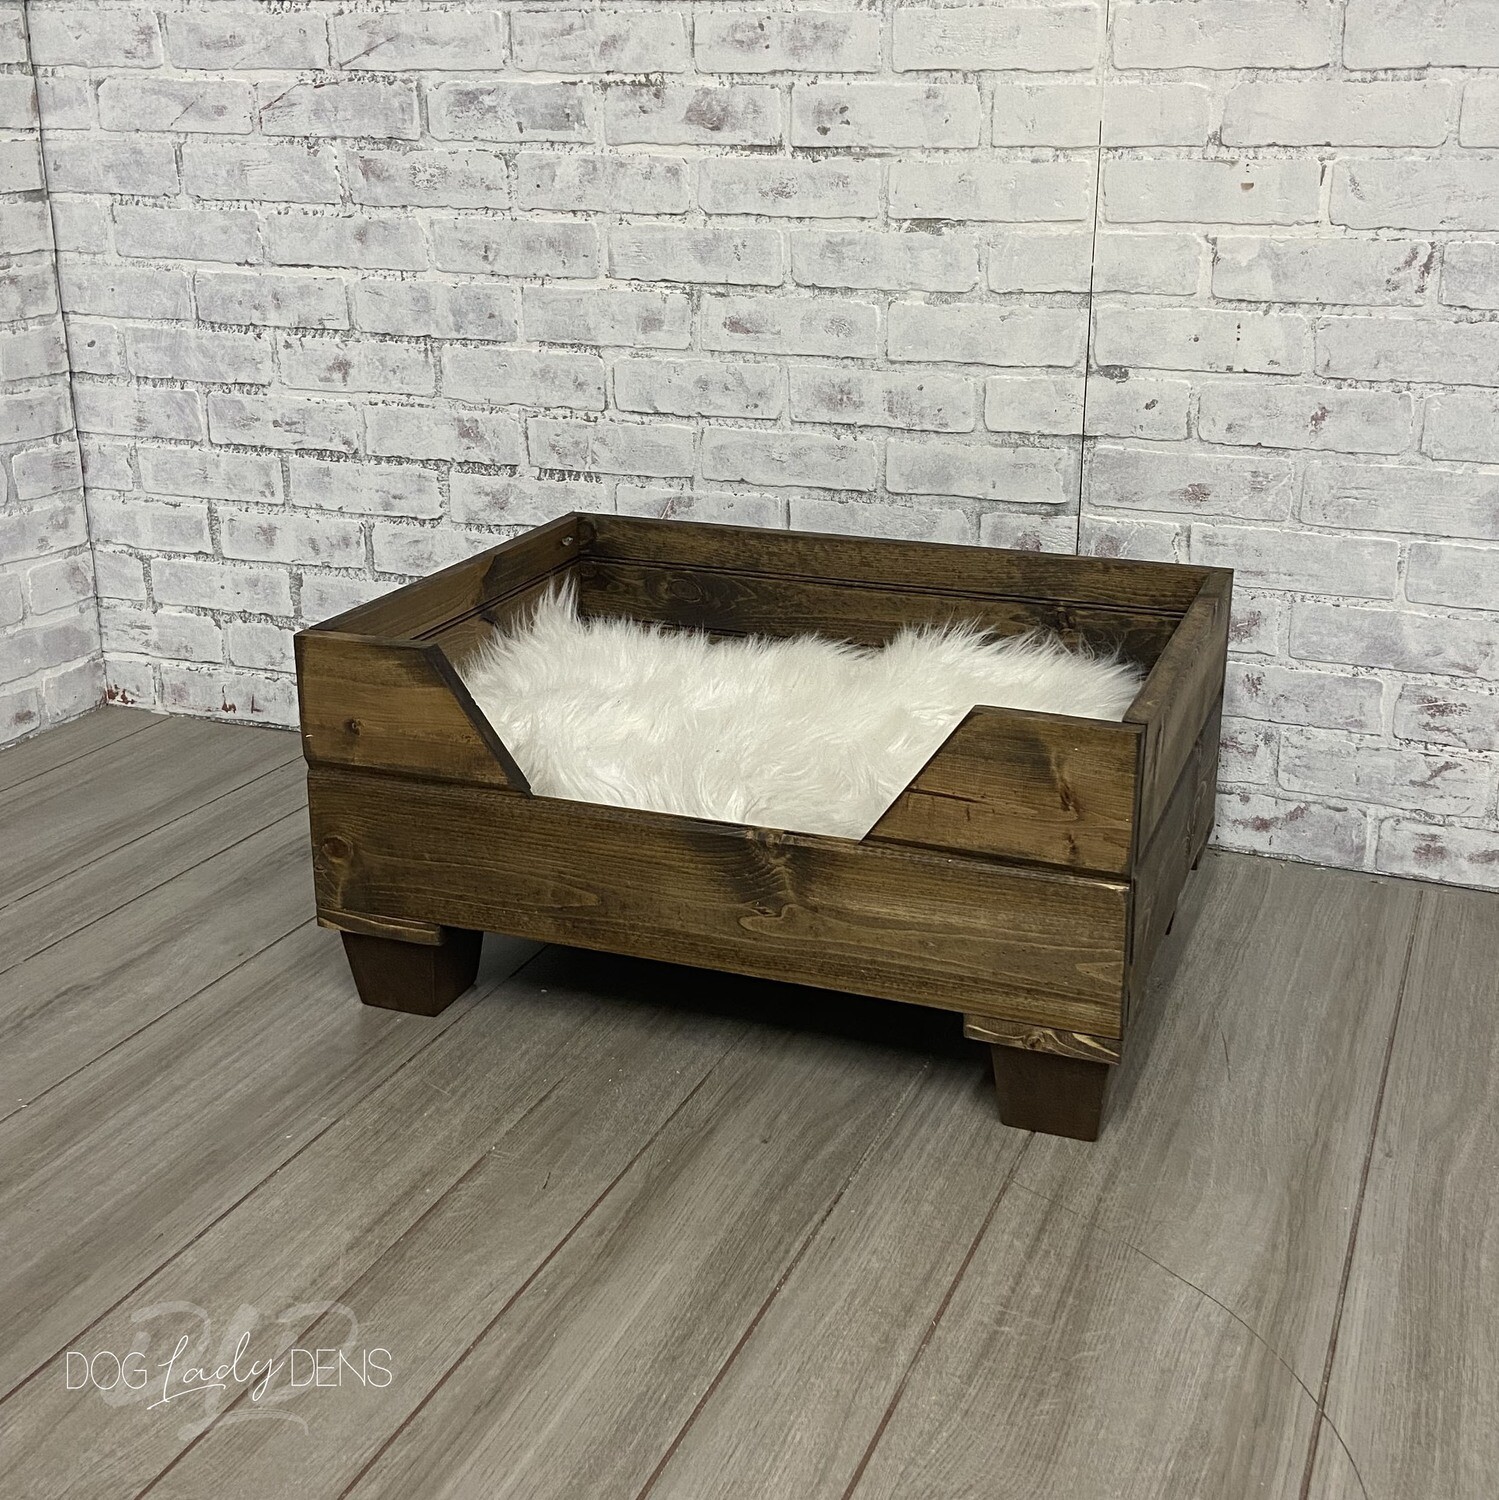 Rustic Dog Beds